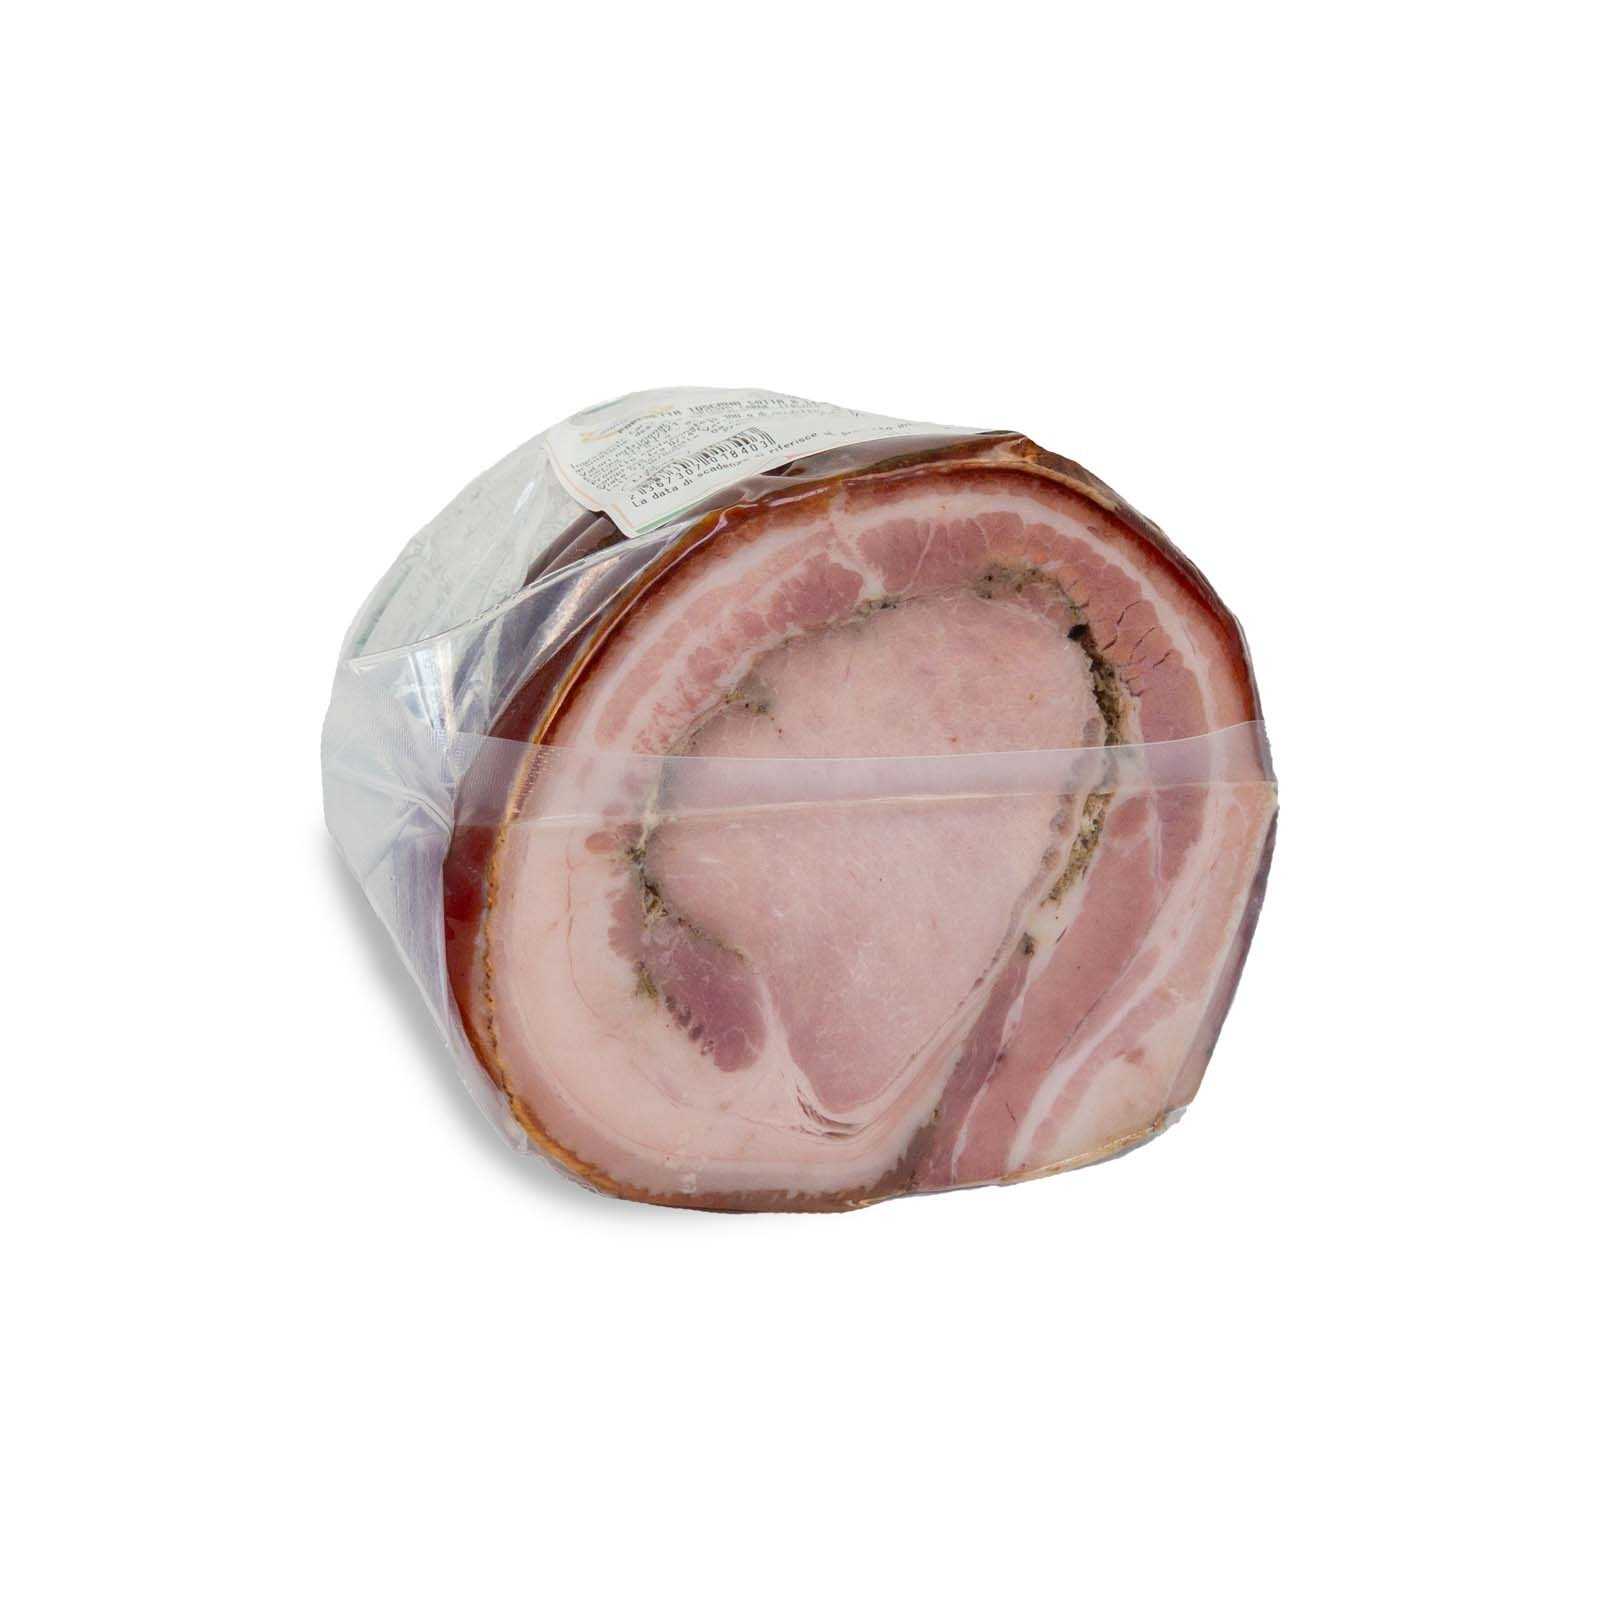 The Wood Cooked Porchetta has a millenary tradition, so much so that even the Ancient Romans loved to consume it in large quantities during their numerous banquets. The Tuscan tradition recommends, for its preparation, the use of only the pork shoulder obtained from specimens of excellent quality, seasoned with aromatic herbs and cooked in wood slowly for at least 9/12 hours, a characteristic that guarantees a crunchy crust to the point. fair and a tasty and soft interior.